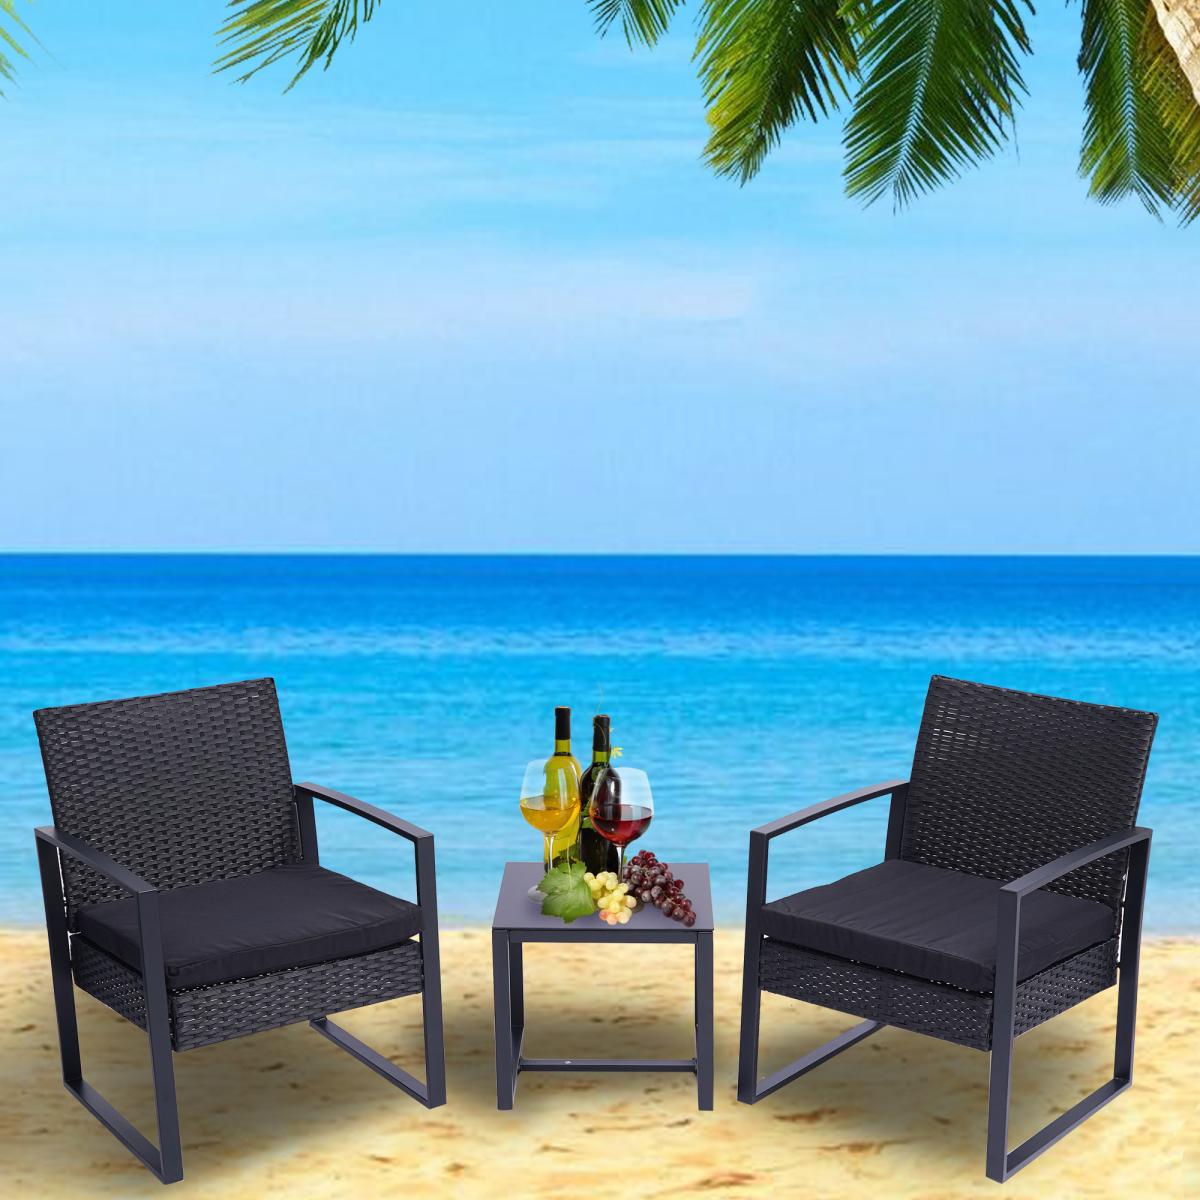 3 Pieces Patio Set Outdoor Wicker Patio Furniture Sets Modern Set Rattan Chair Conversation Sets with Coffee Table for Yard and Bistro (Black)